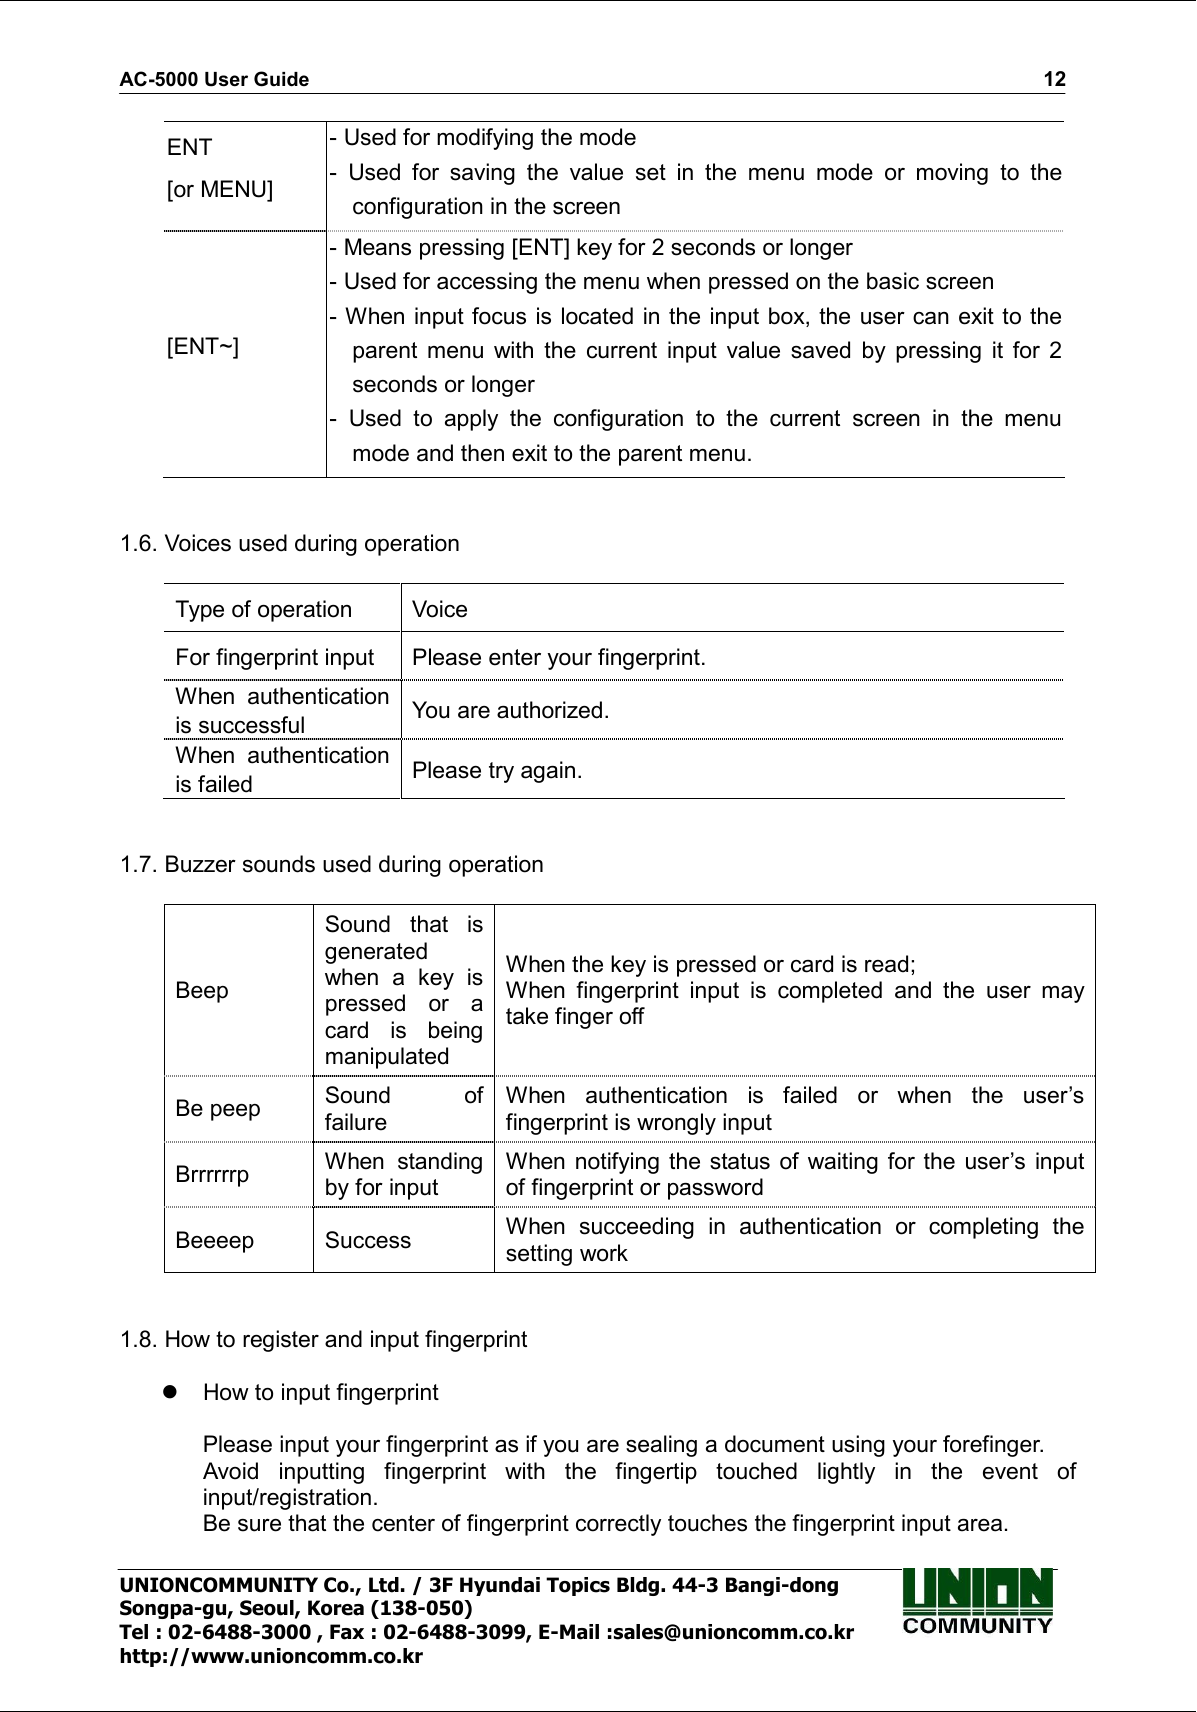 AC-5000 User Guide                                                                                                                                                   12 UNIONCOMMUNITY Co., Ltd. / 3F Hyundai Topics Bldg. 44-3 Bangi-dong Songpa-gu, Seoul, Korea (138-050) Tel : 02-6488-3000 , Fax : 02-6488-3099, E-Mail :sales@unioncomm.co.kr http://www.unioncomm.co.kr ENT [or MENU] - Used for modifying the mode -  Used  for  saving  the  value  set  in  the  menu  mode  or  moving  to  the configuration in the screen [ENT~] - Means pressing [ENT] key for 2 seconds or longer   - Used for accessing the menu when pressed on the basic screen - When input focus is located in the input box, the user can exit to the parent  menu  with  the  current input  value  saved  by  pressing  it  for  2 seconds or longer -  Used  to  apply  the  configuration  to  the  current  screen  in  the  menu mode and then exit to the parent menu.   1.6. Voices used during operation  Type of operation  Voice For fingerprint input  Please enter your fingerprint. When  authentication is successful  You are authorized. When  authentication is failed  Please try again.   1.7. Buzzer sounds used during operation  Beep Sound  that  is generated when  a  key  is pressed  or  a card  is  being manipulated When the key is pressed or card is read; When  fingerprint  input  is  completed  and  the  user  may take finger off Be peep  Sound  of failure When  authentication  is  failed  or  when  the  user’s fingerprint is wrongly input Brrrrrrp  When  standing by for input When notifying  the status of waiting for the user’s input of fingerprint or password Beeeep  Success  When  succeeding  in  authentication  or  completing  the setting work   1.8. How to register and input fingerprint    How to input fingerprint  Please input your fingerprint as if you are sealing a document using your forefinger. Avoid  inputting  fingerprint  with  the  fingertip  touched  lightly  in  the  event  of input/registration. Be sure that the center of fingerprint correctly touches the fingerprint input area. 